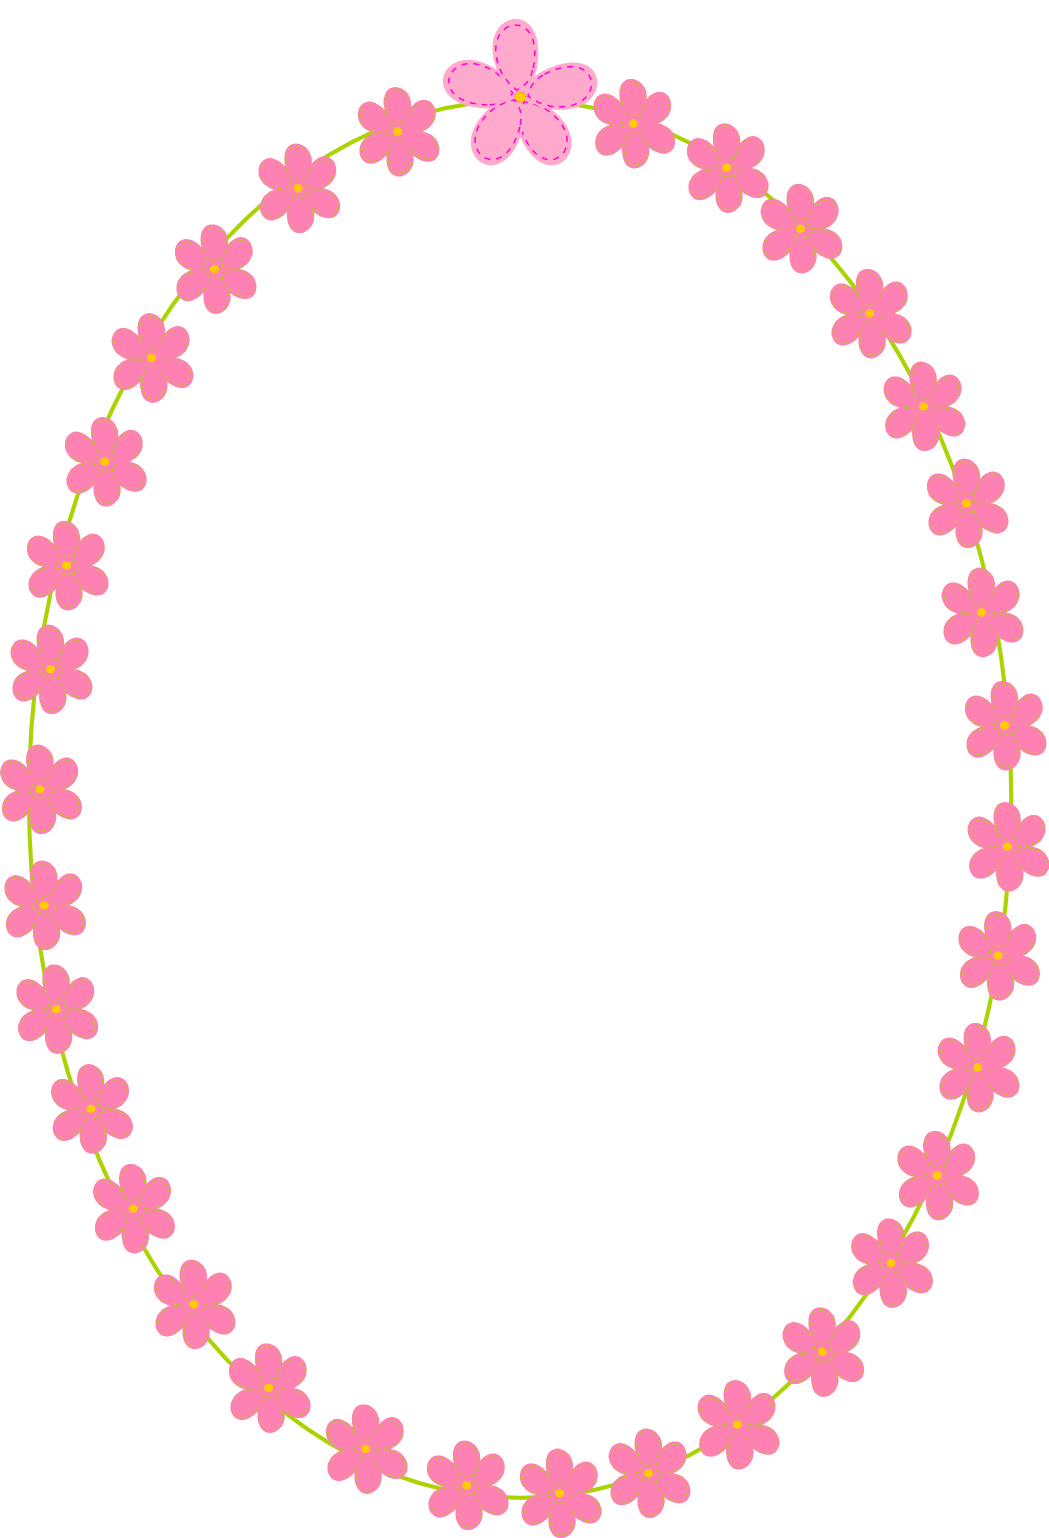 clipart flower borders and frames - photo #44